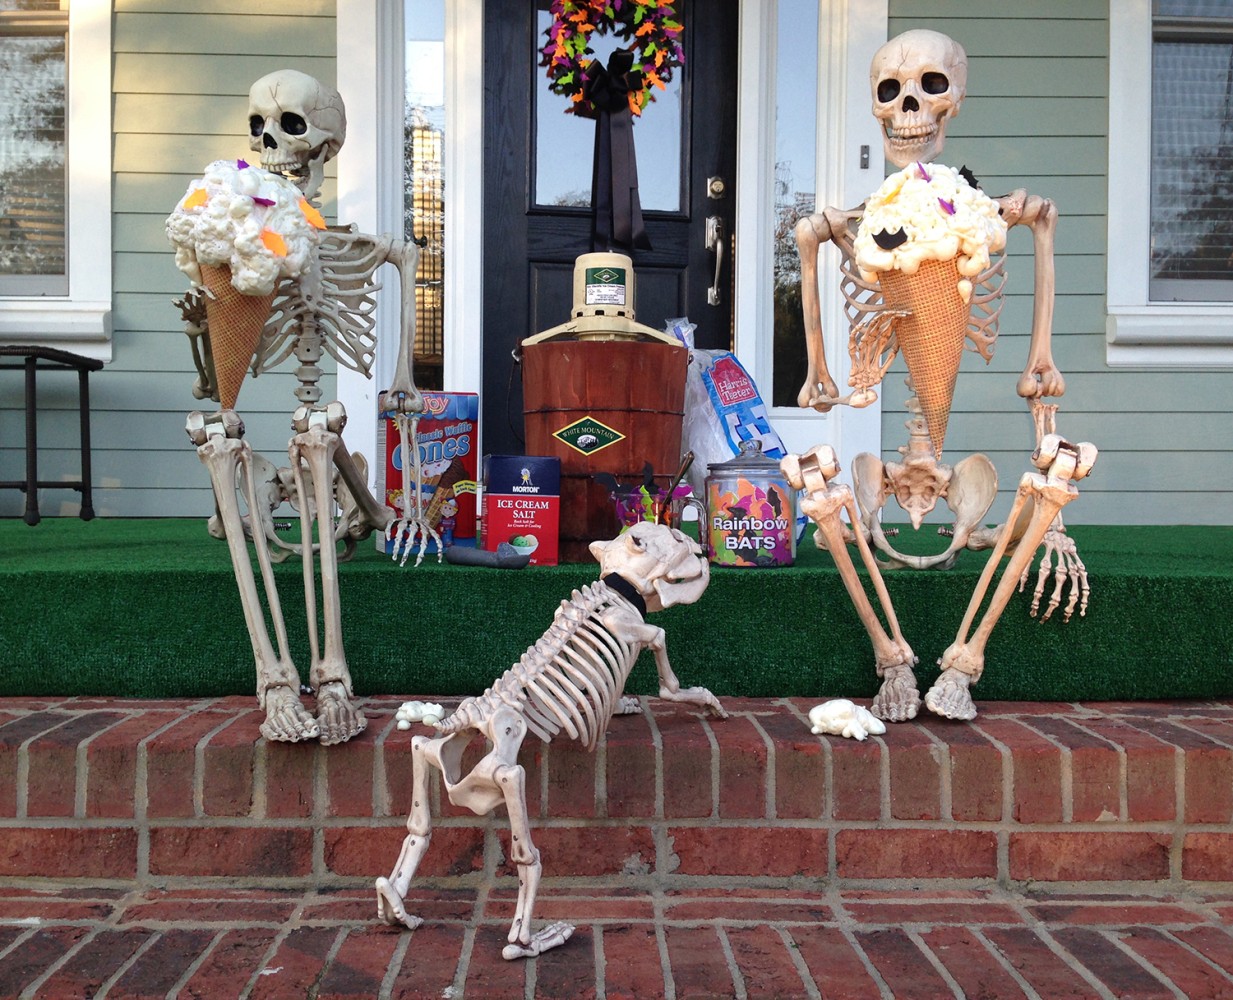 No bones about it: Comical, creative 'Baxter Skeletons' rule Halloween ...